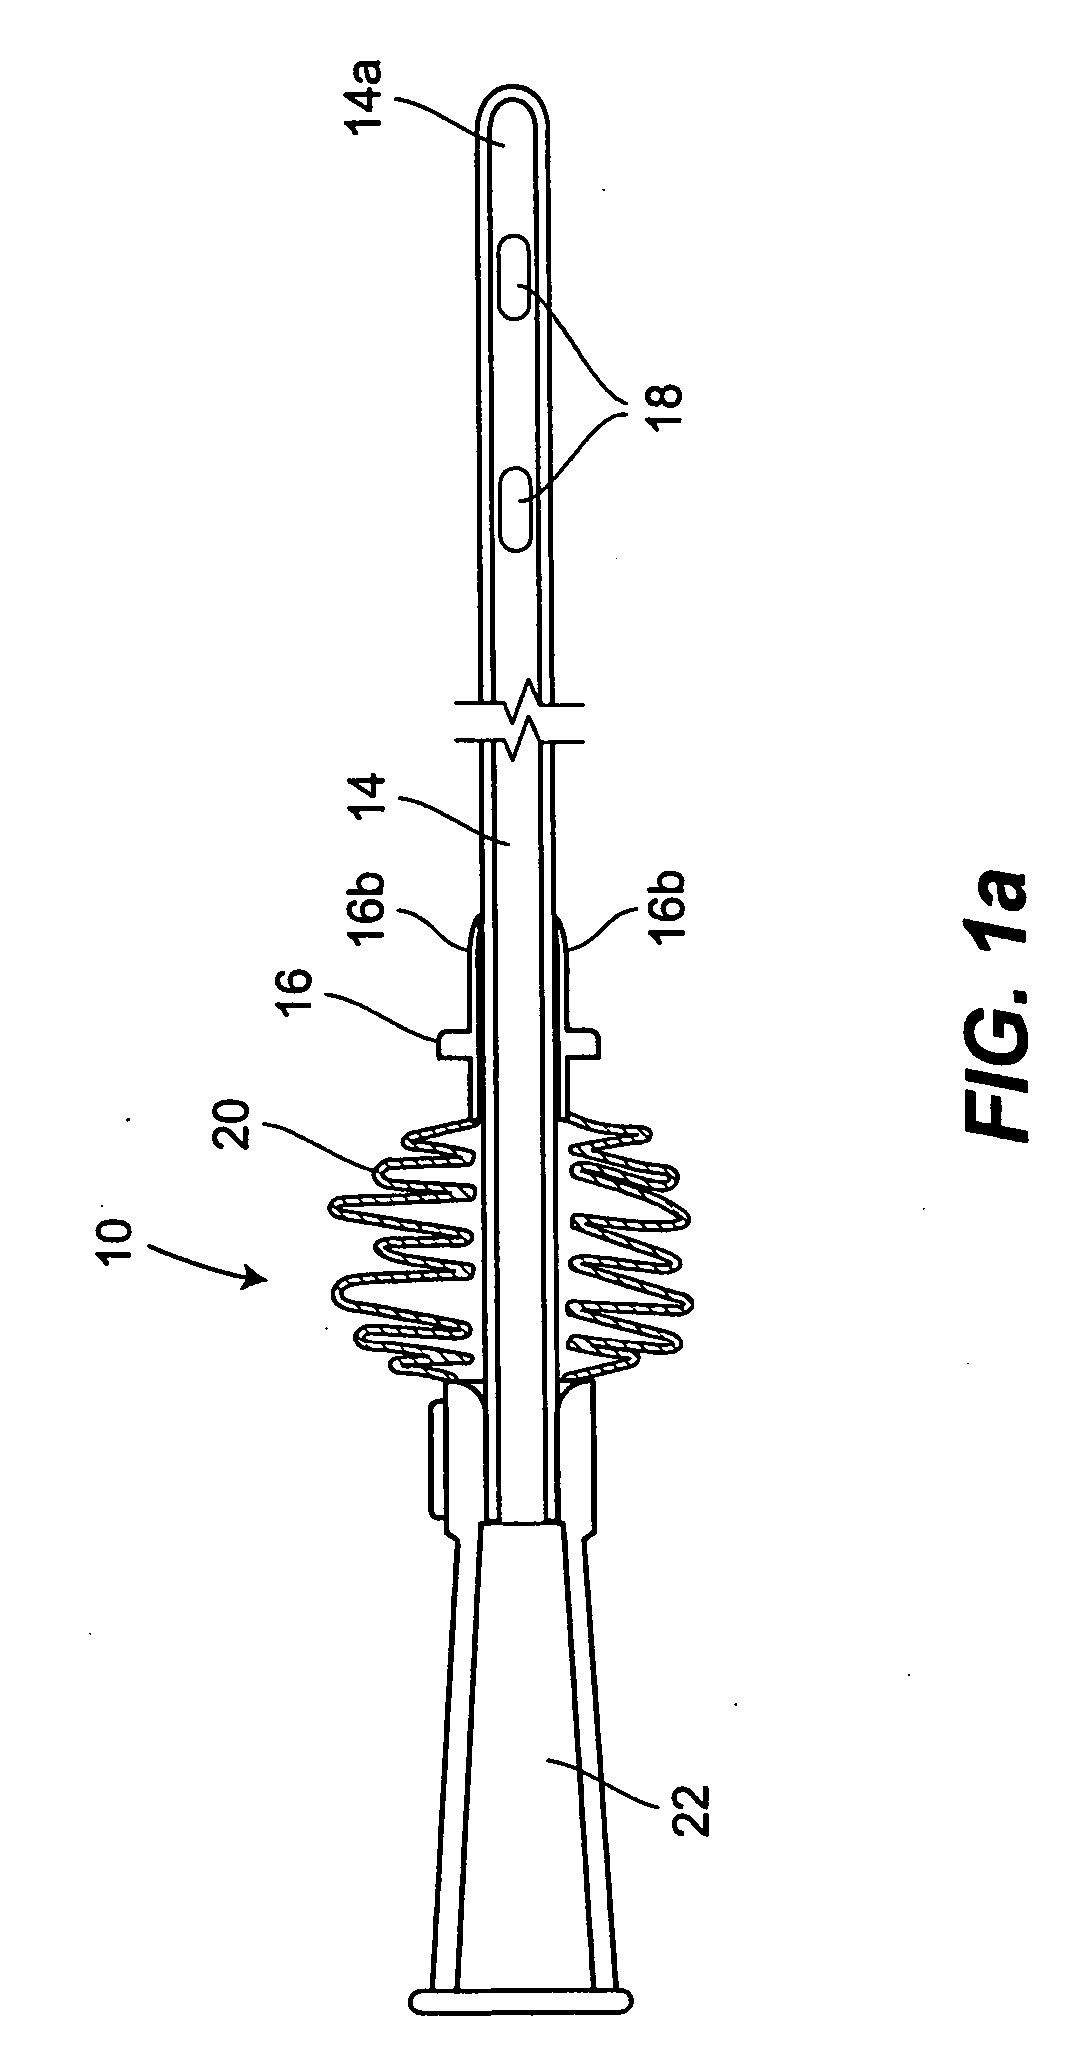 Vapor hydration of a hydrophilic catheter in a package